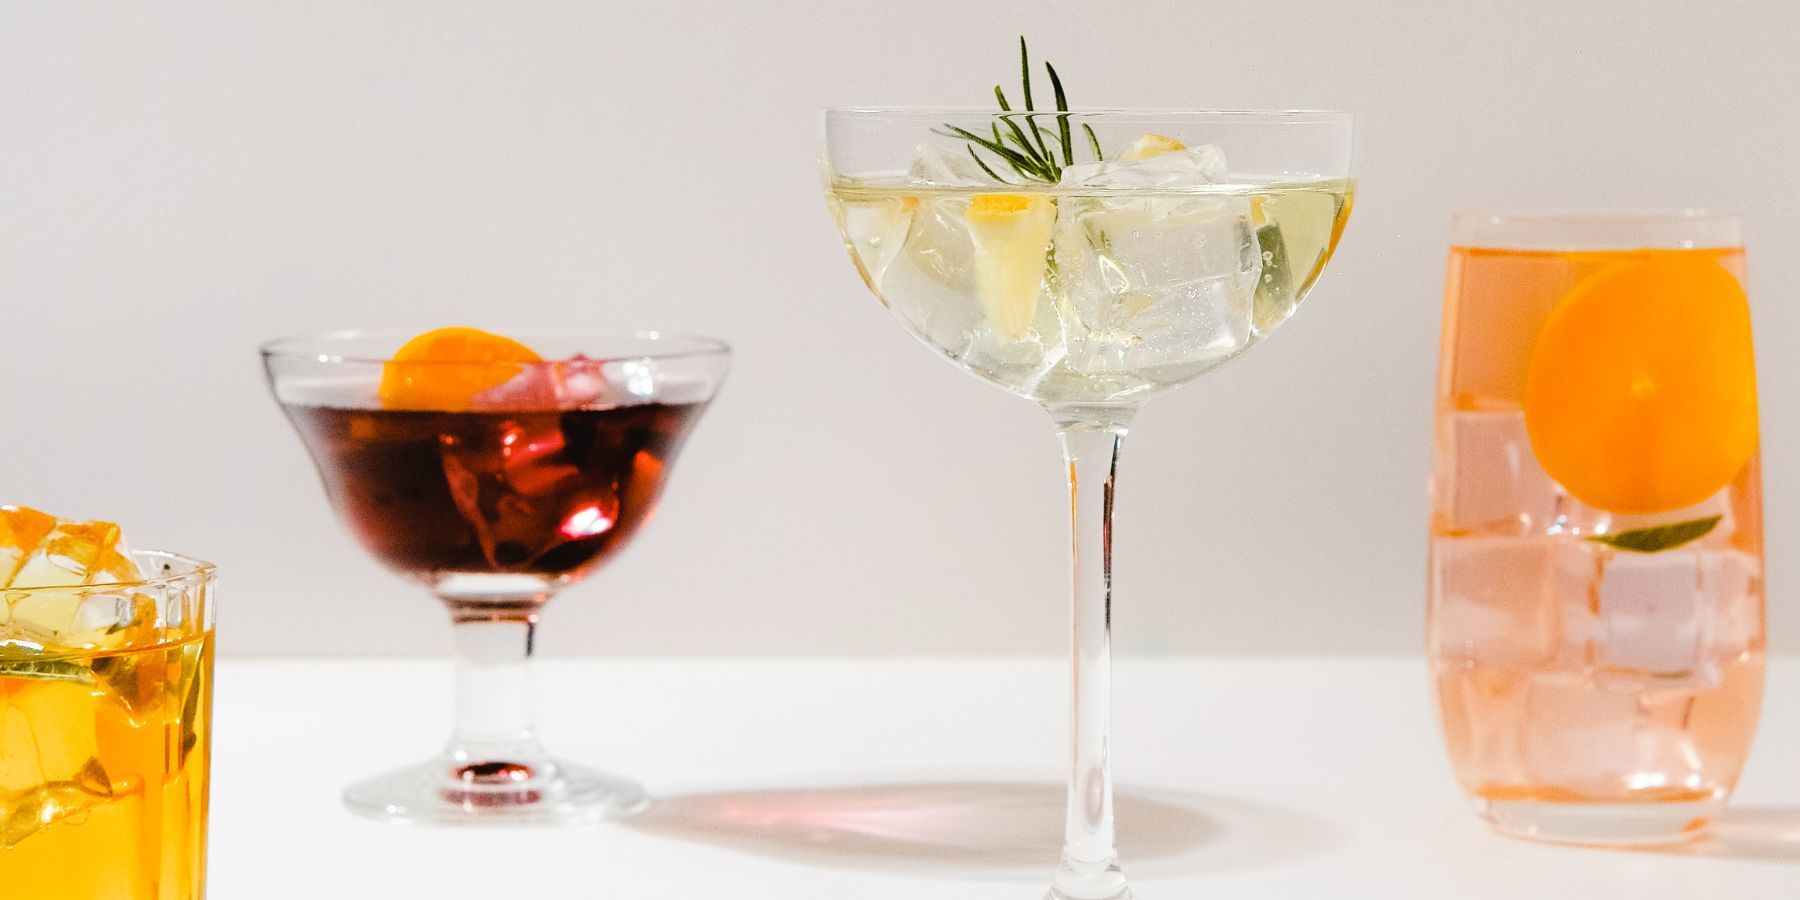 https://www.themixer.com/en-uk/wp-content/uploads/sites/3/2022/07/237.US_Cocktail-Glass-Types_Canva_MAEknl6zO4Y-assorted-cocktail-drinks-in-glasses.jpg